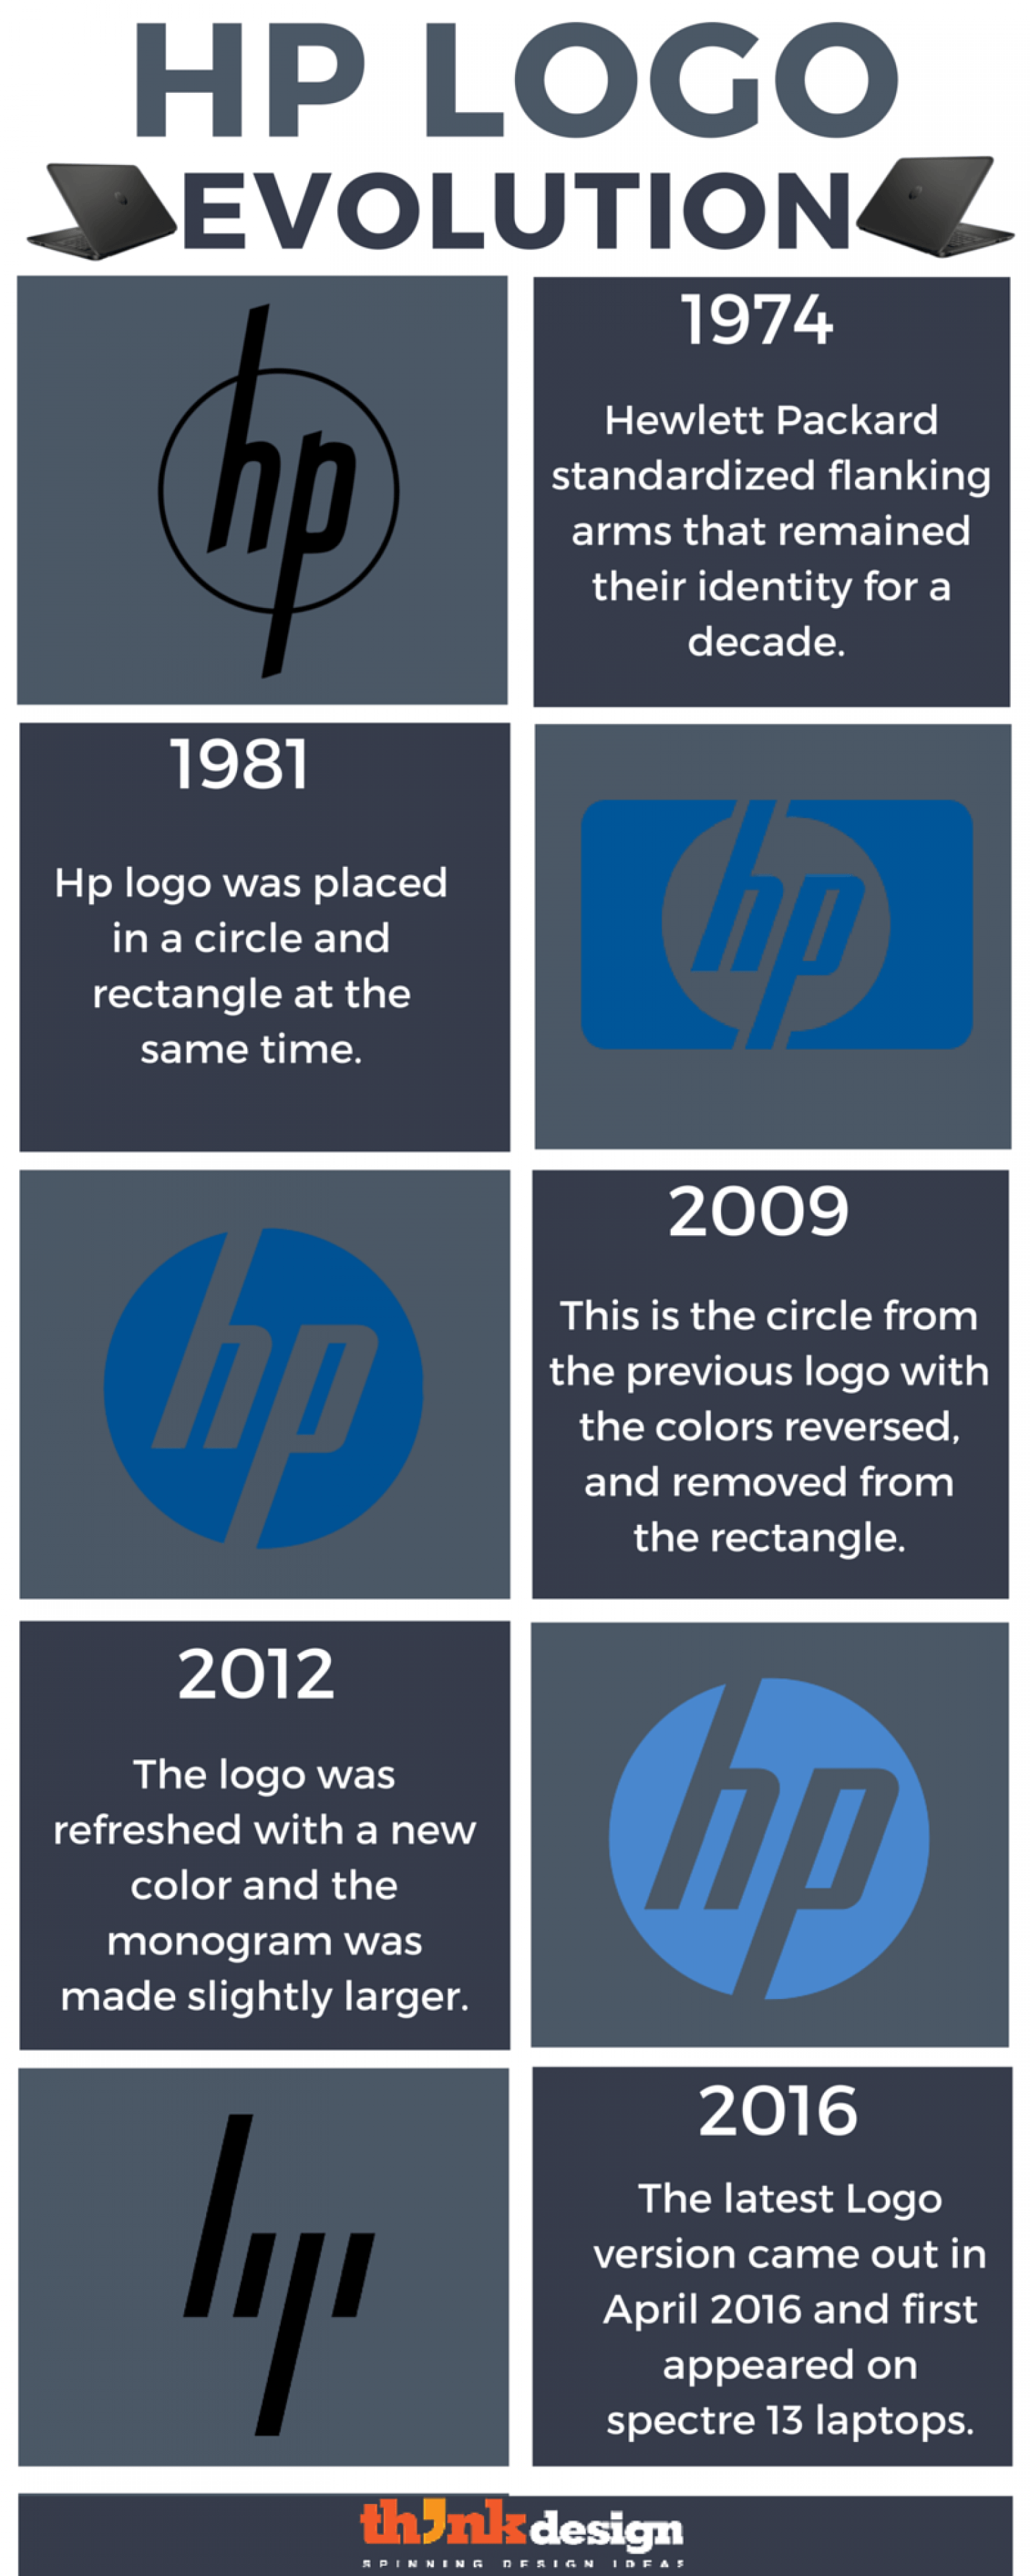 Latest HP Logo - HP Logo Evolution - The Journey of an Iconic Logo | Visual.ly